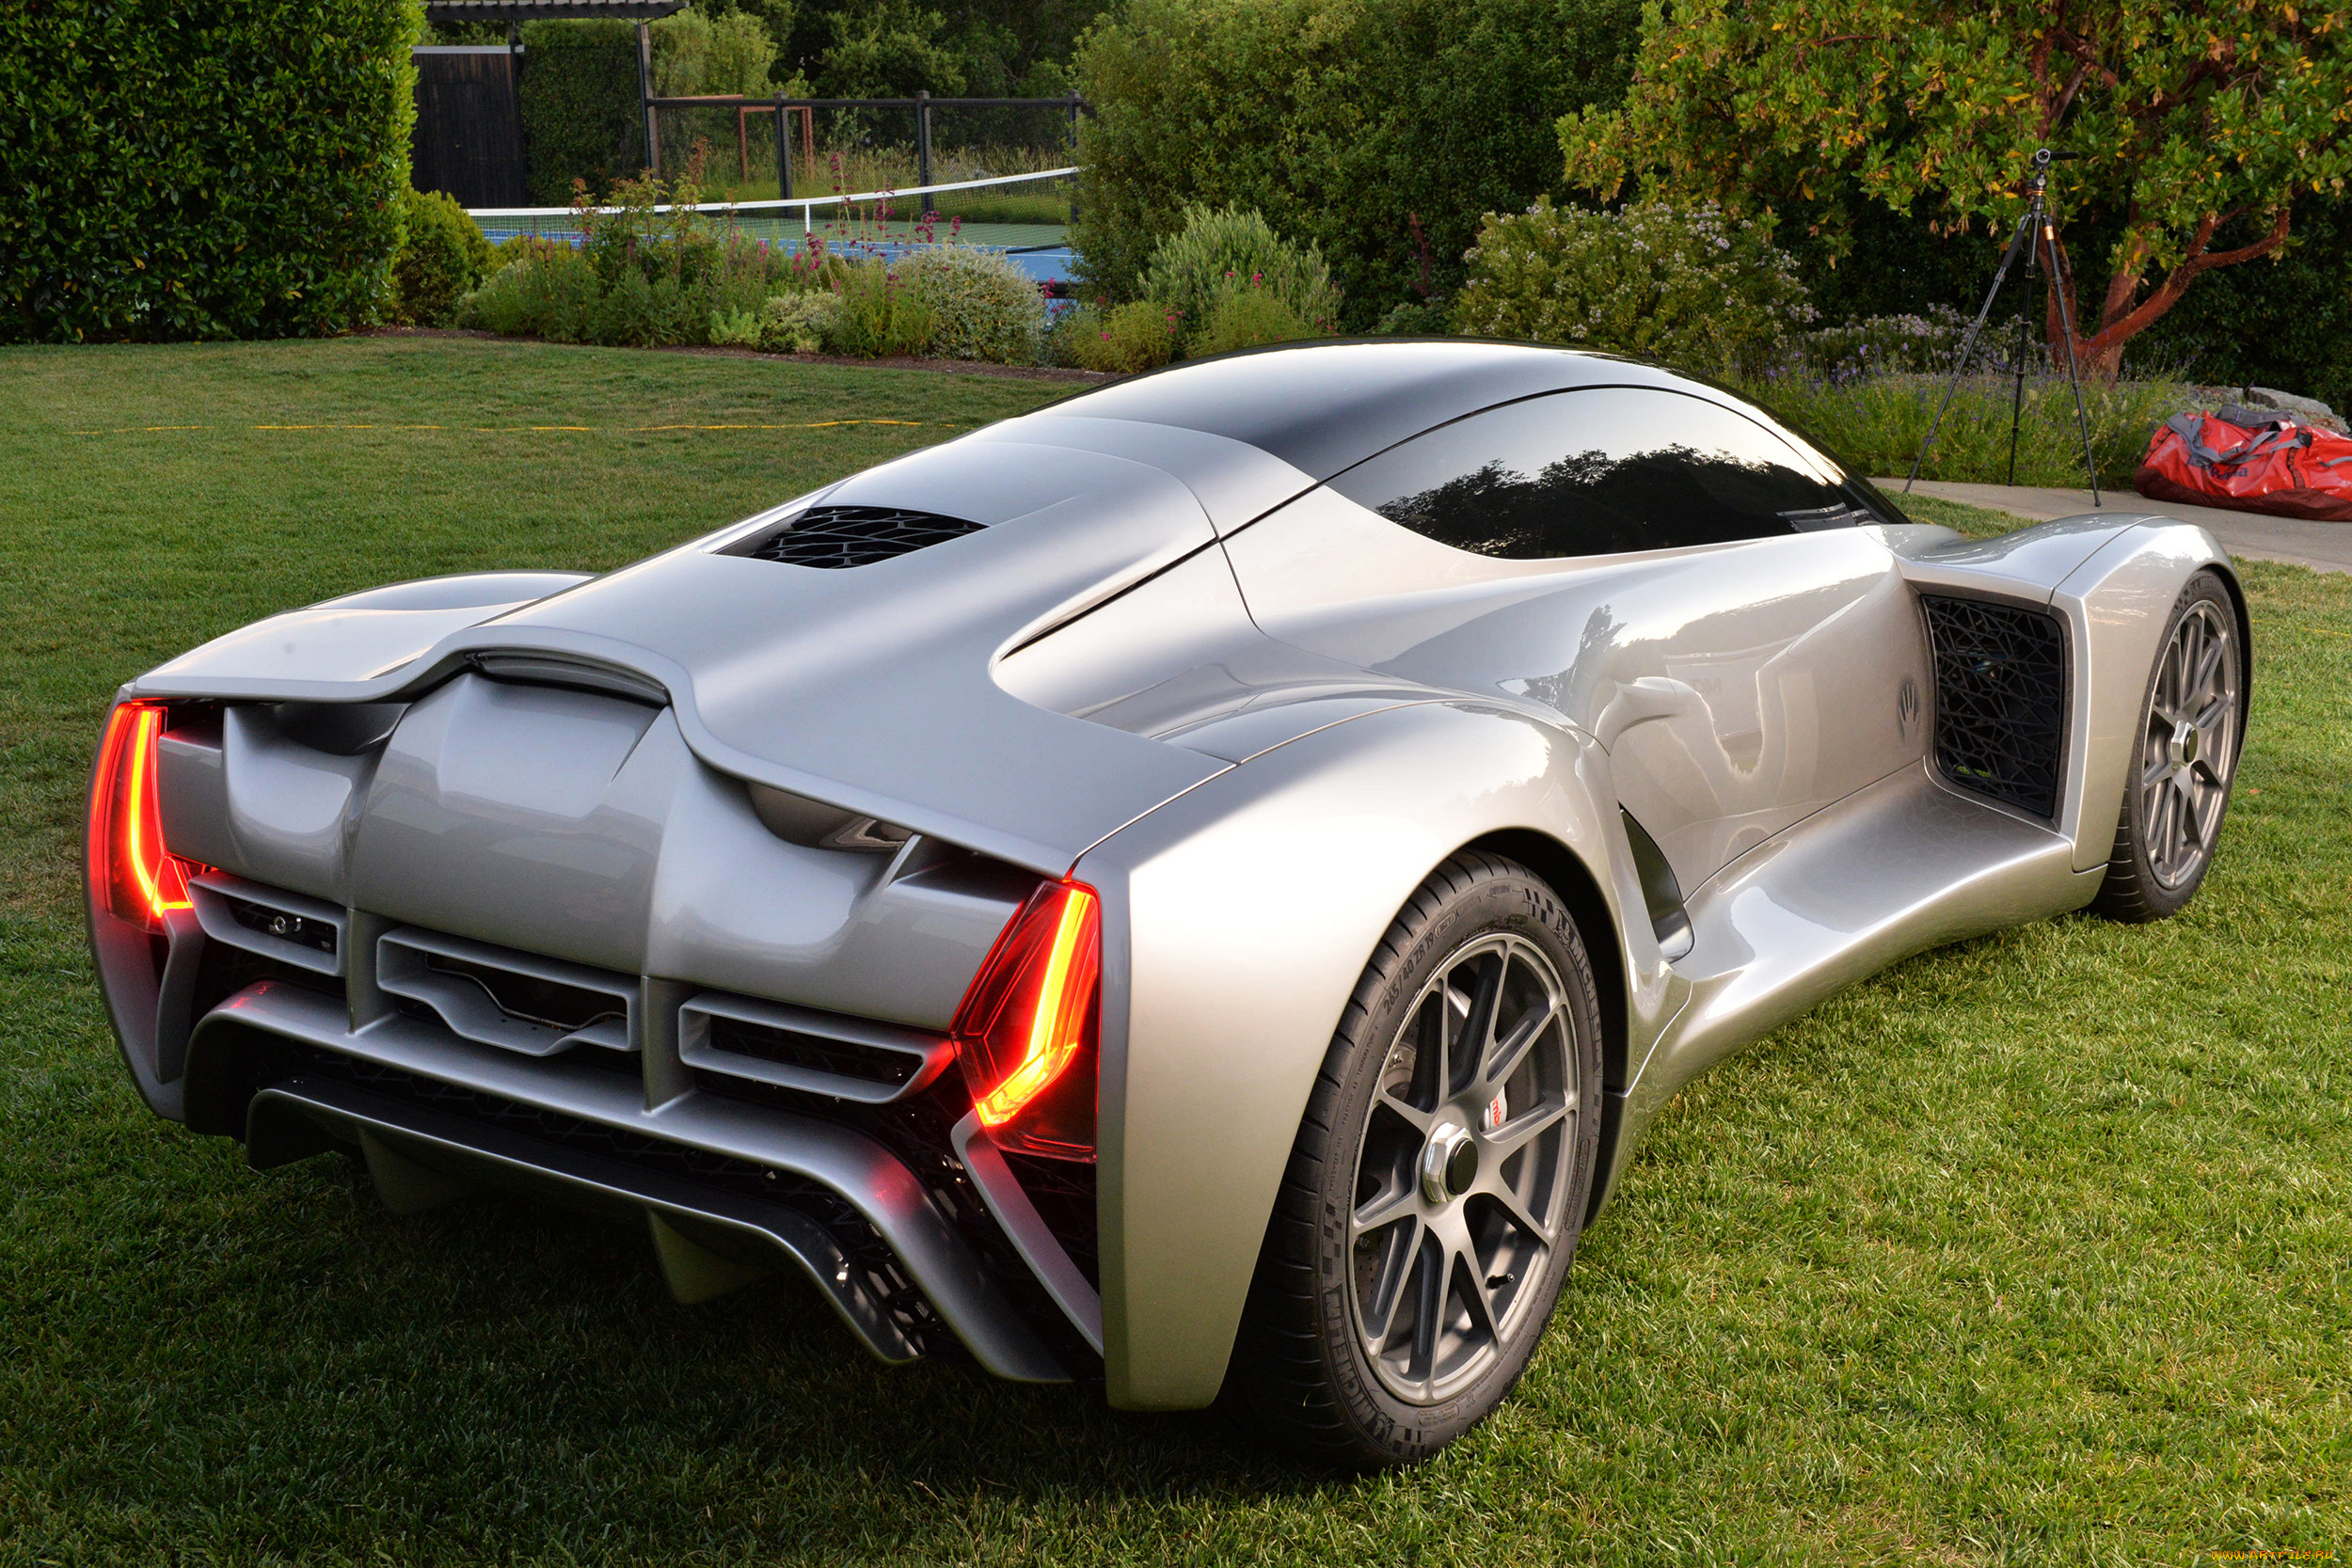 dm blade is a 700 hp supercar with 3d printed, , -unsort, dm, blade, is, a, 700, hp, supercar, with, 3d, printed